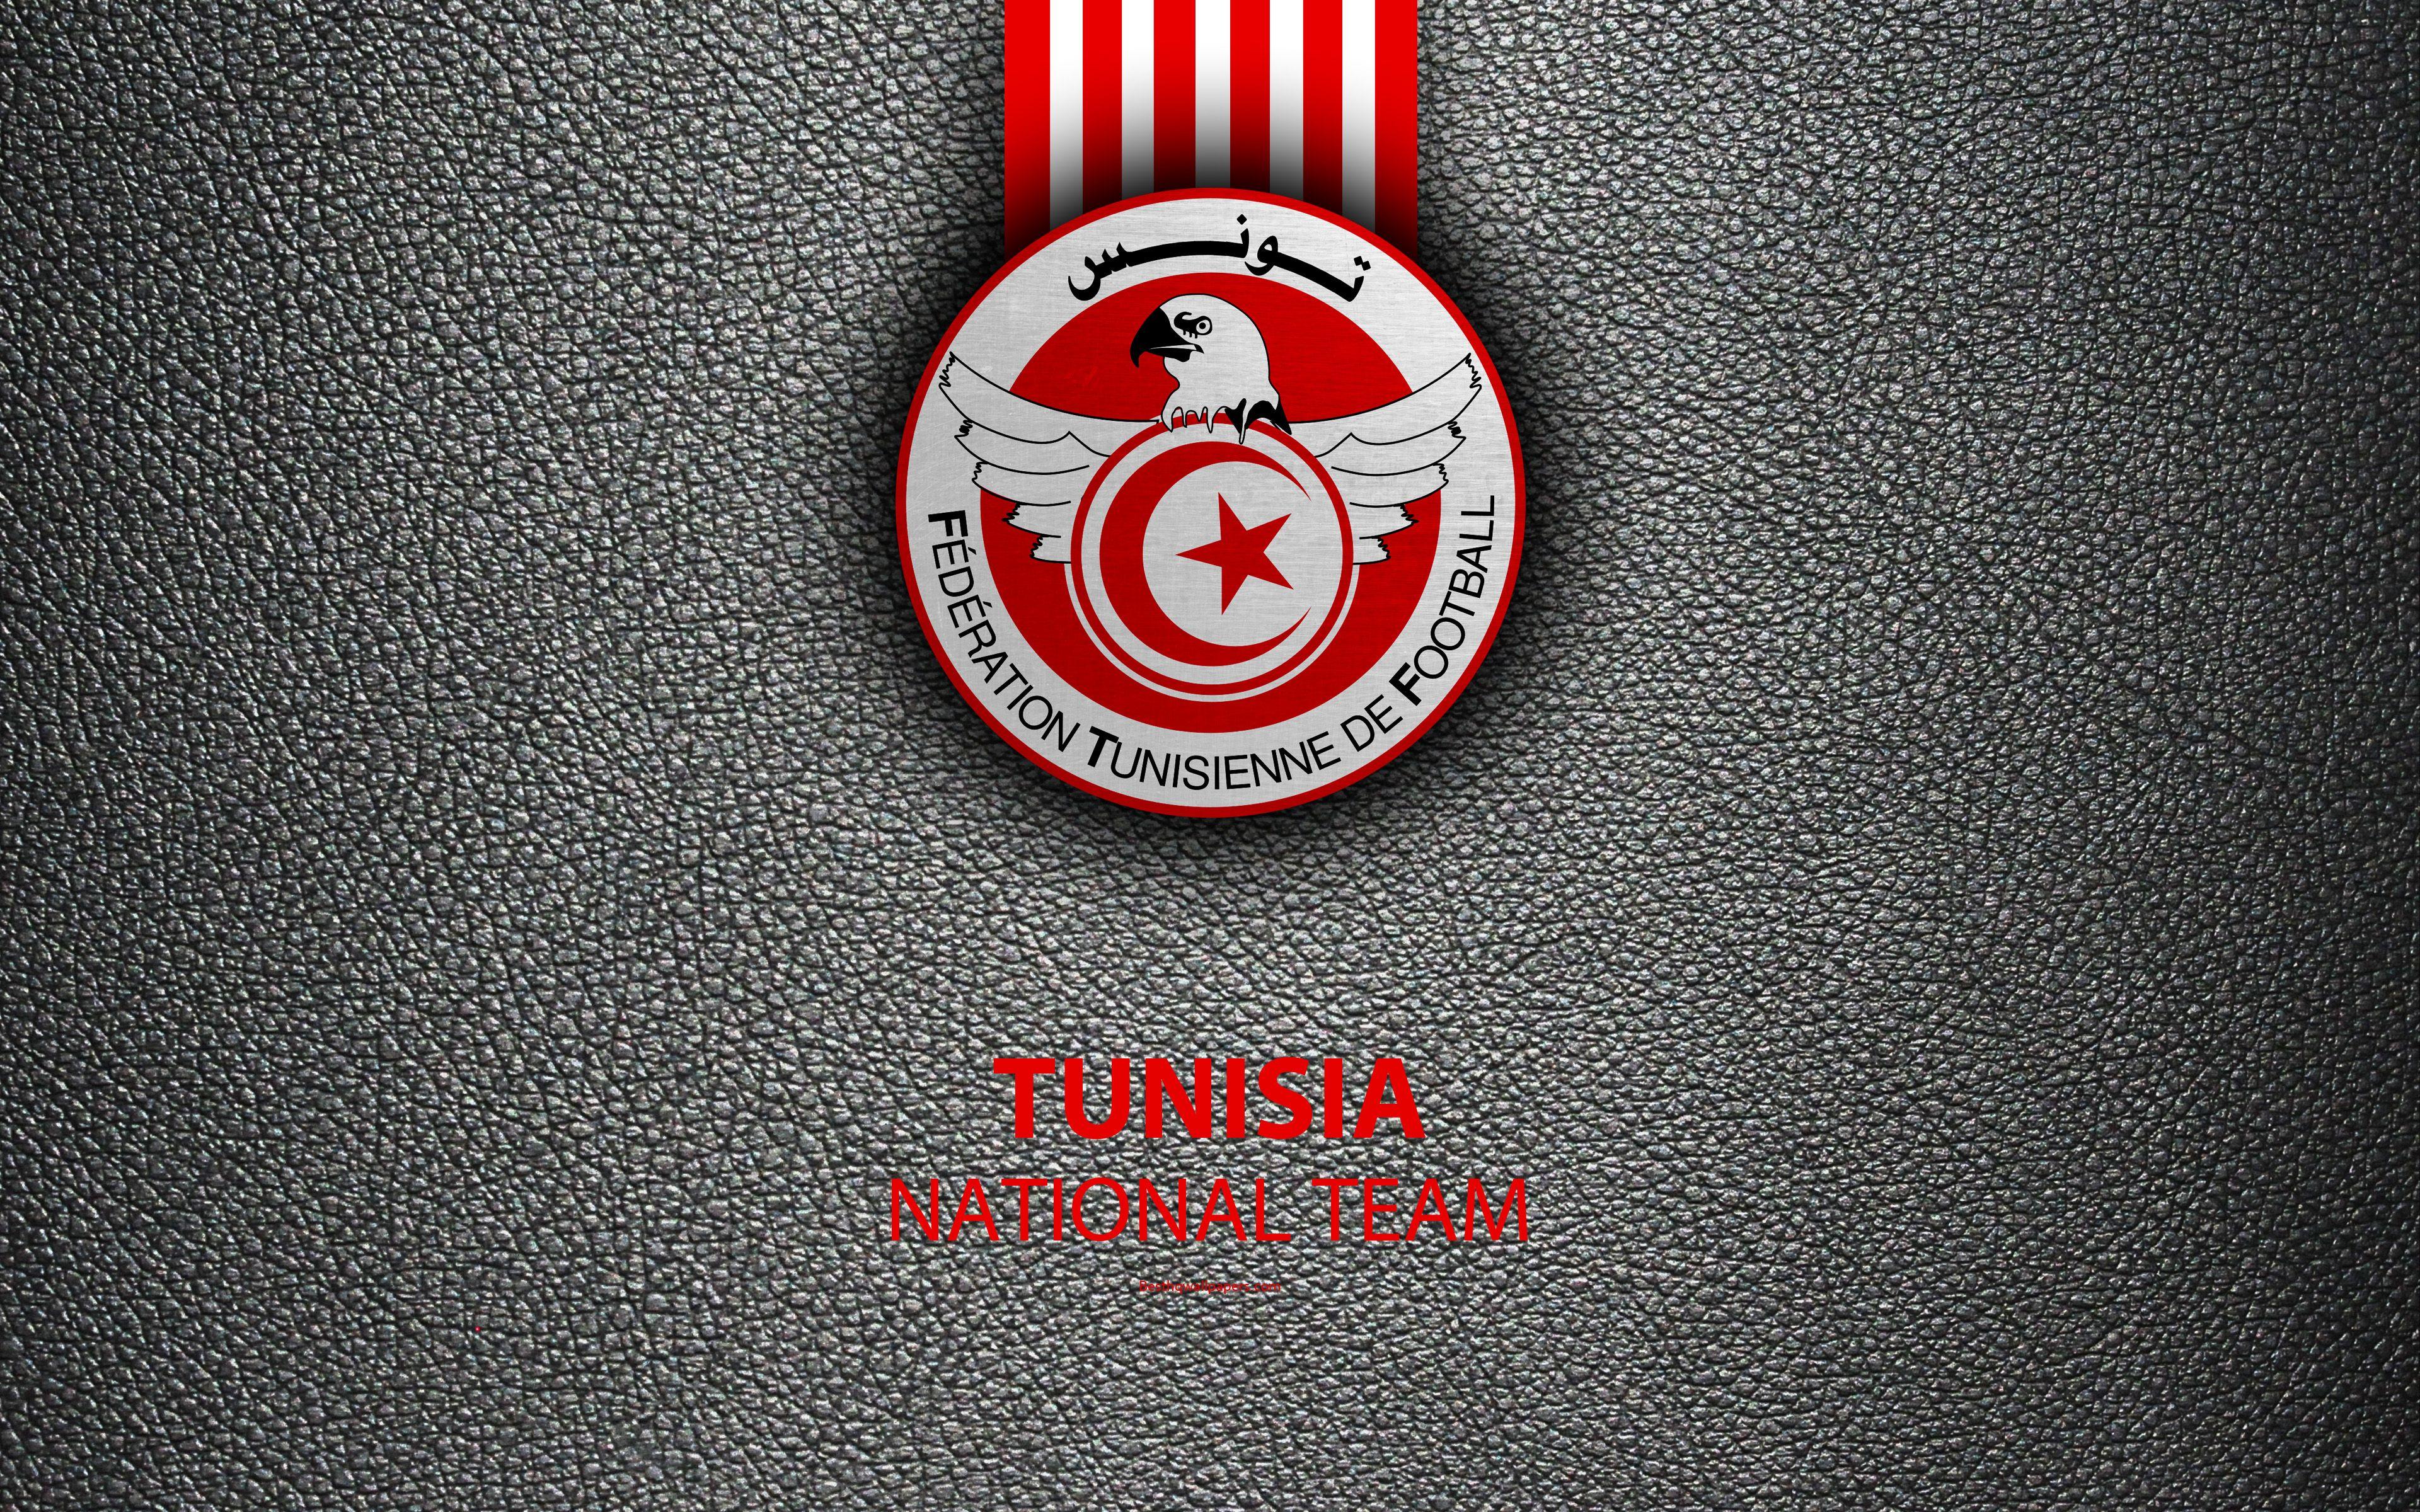 Download wallpaper Tunisia national football team, 4K, leather